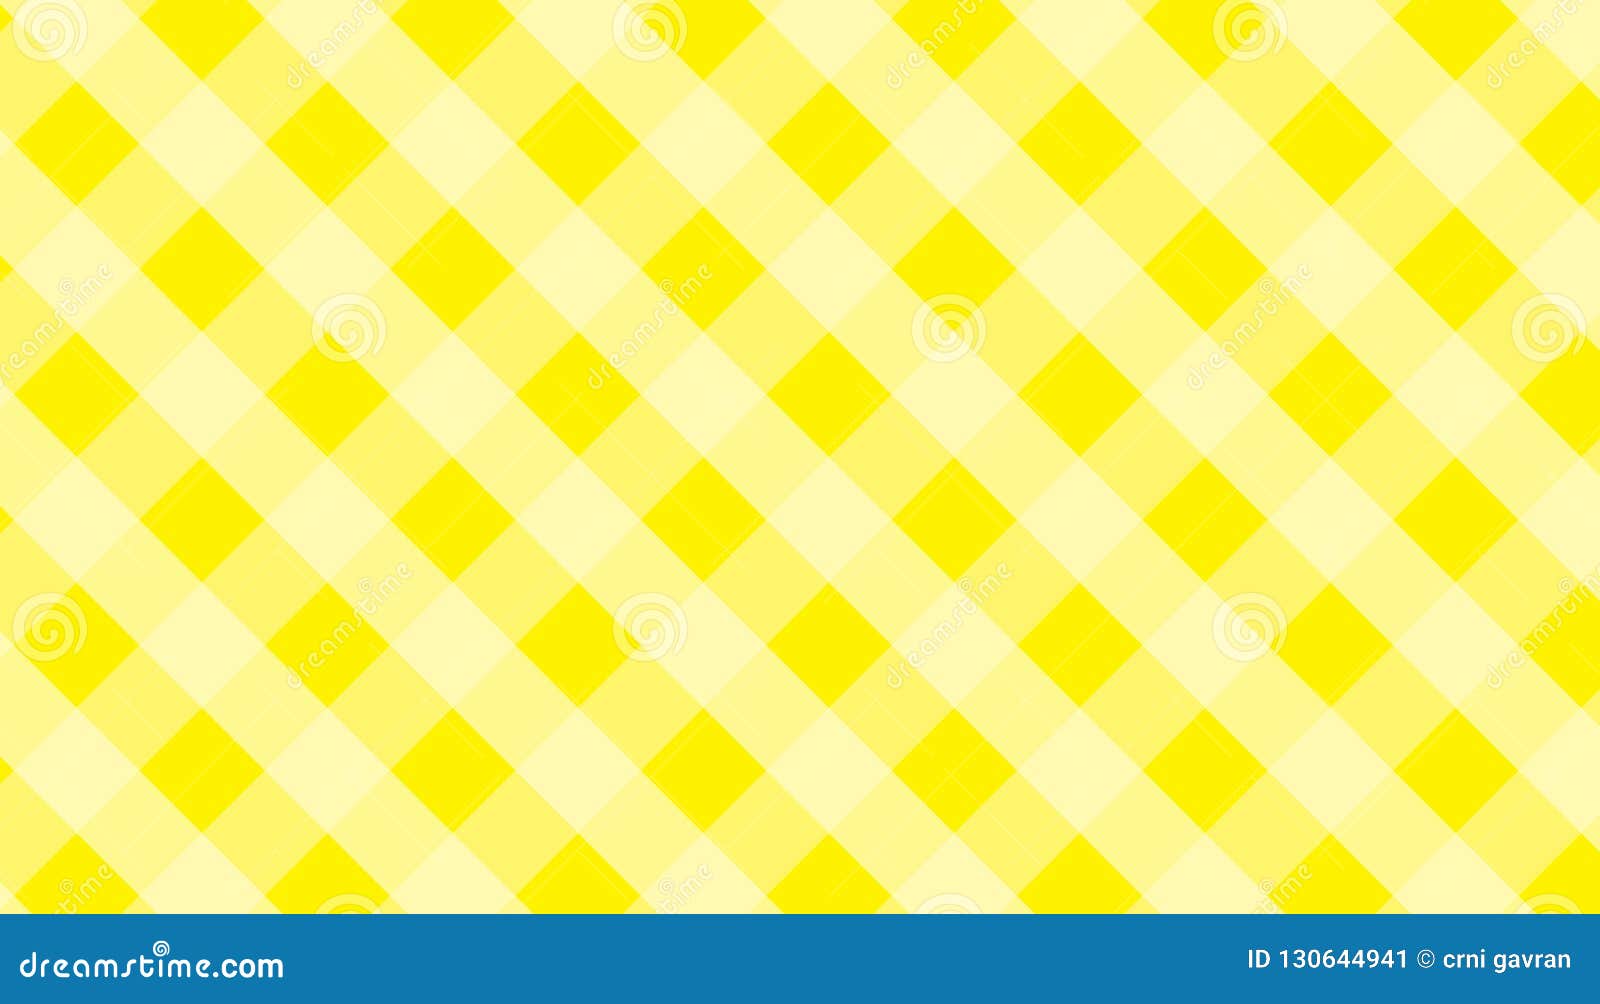 Yellow And White Tablecloth Gingham Checkered Background Vector